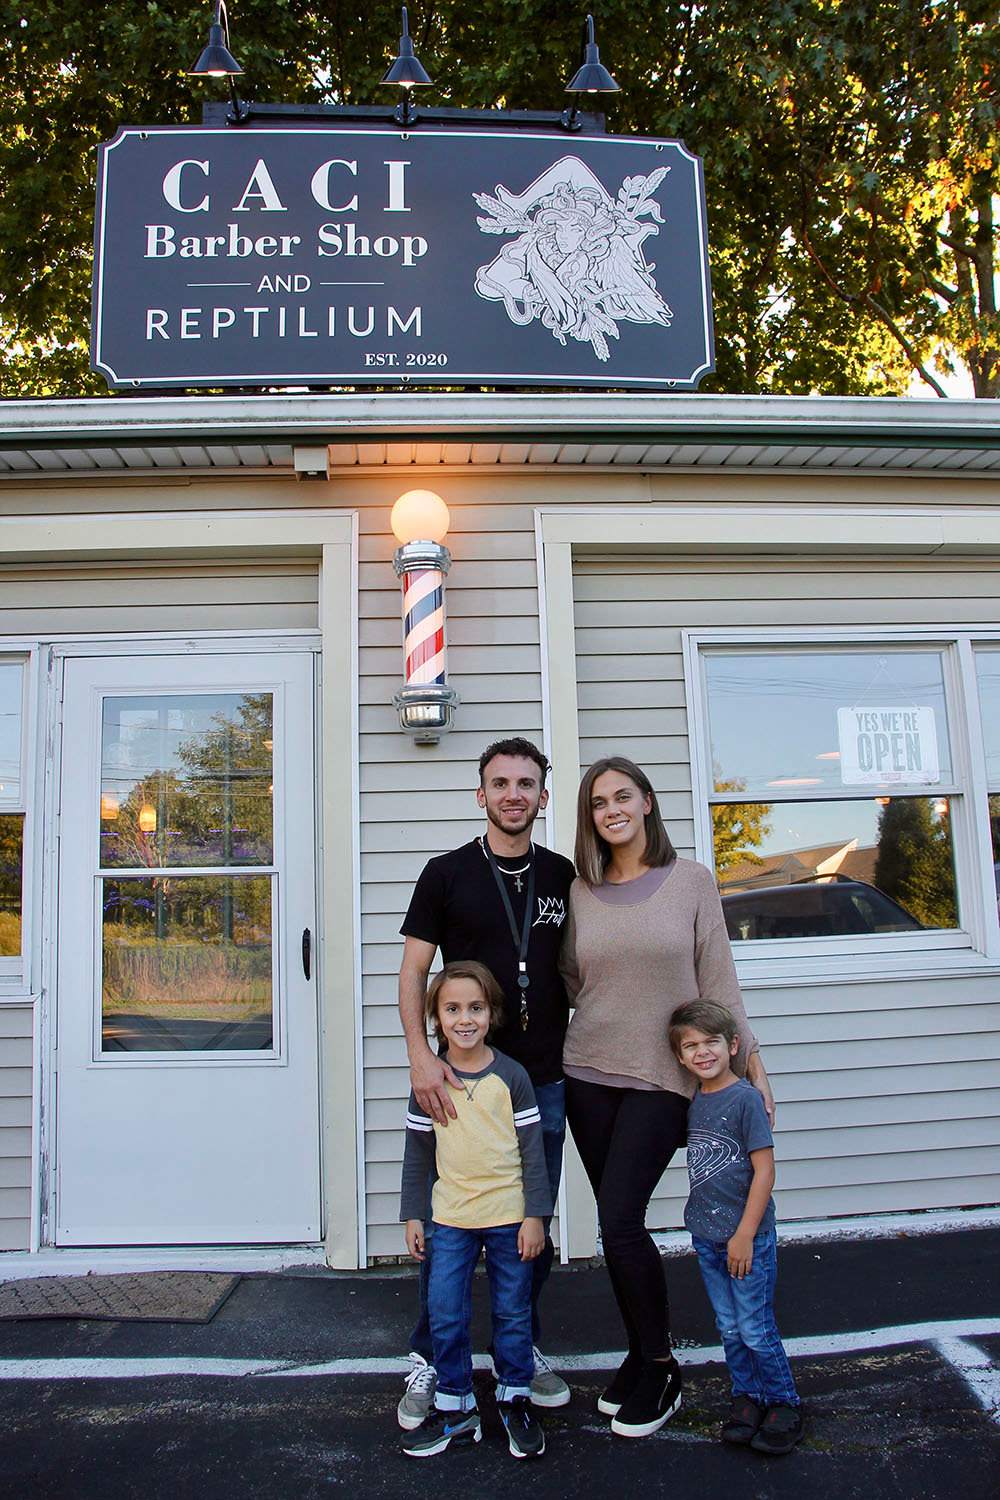 Vincenzo “Chenzo” Caci poses with his family in front of his business, “Caci Barber Shop and Reptilium” on Route 9W, Highland. Clients here can get a haircut and “talk reptiles” with Chenzo, who houses a multitude of lizards and snakes in glass terraria right in the shop!
Pictured here in the top row (left to right): Chenzo Caci and wife Krystle. Bottom row: sons Sebastiano (left) and Massimo (right).